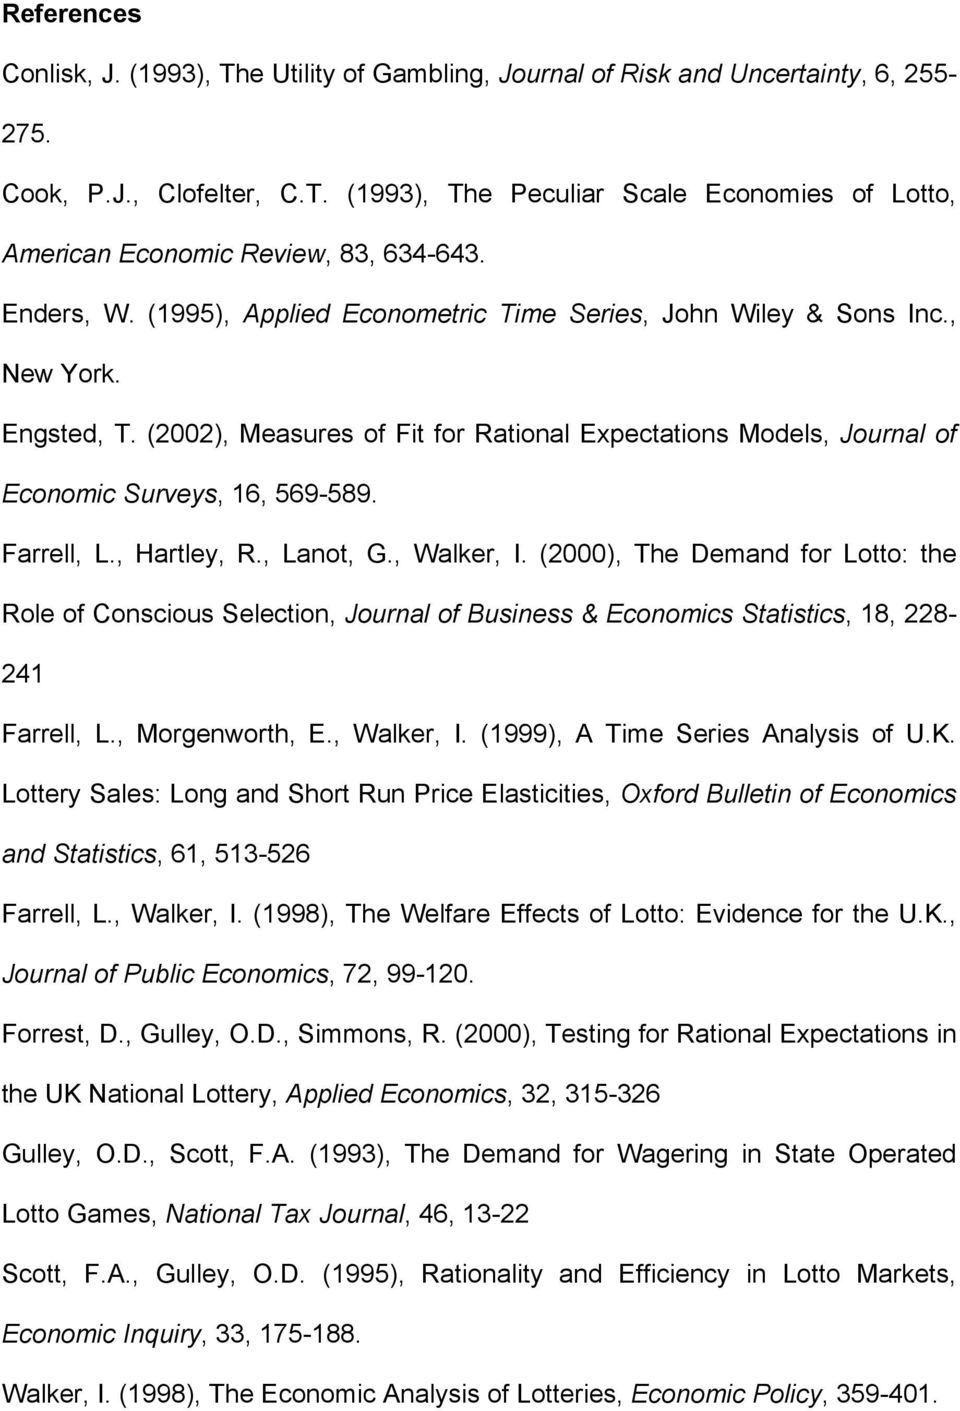 Farrell, L., Harley, R., Lano, G., Walker, I. (2000), The Demand for Loo: he Role of Conscious Selecion, Journal of Business & Economics Saisics, 18, 228-241 Farrell, L., Morgenworh, E., Walker, I. (1999), A Time Series Analysis of U.